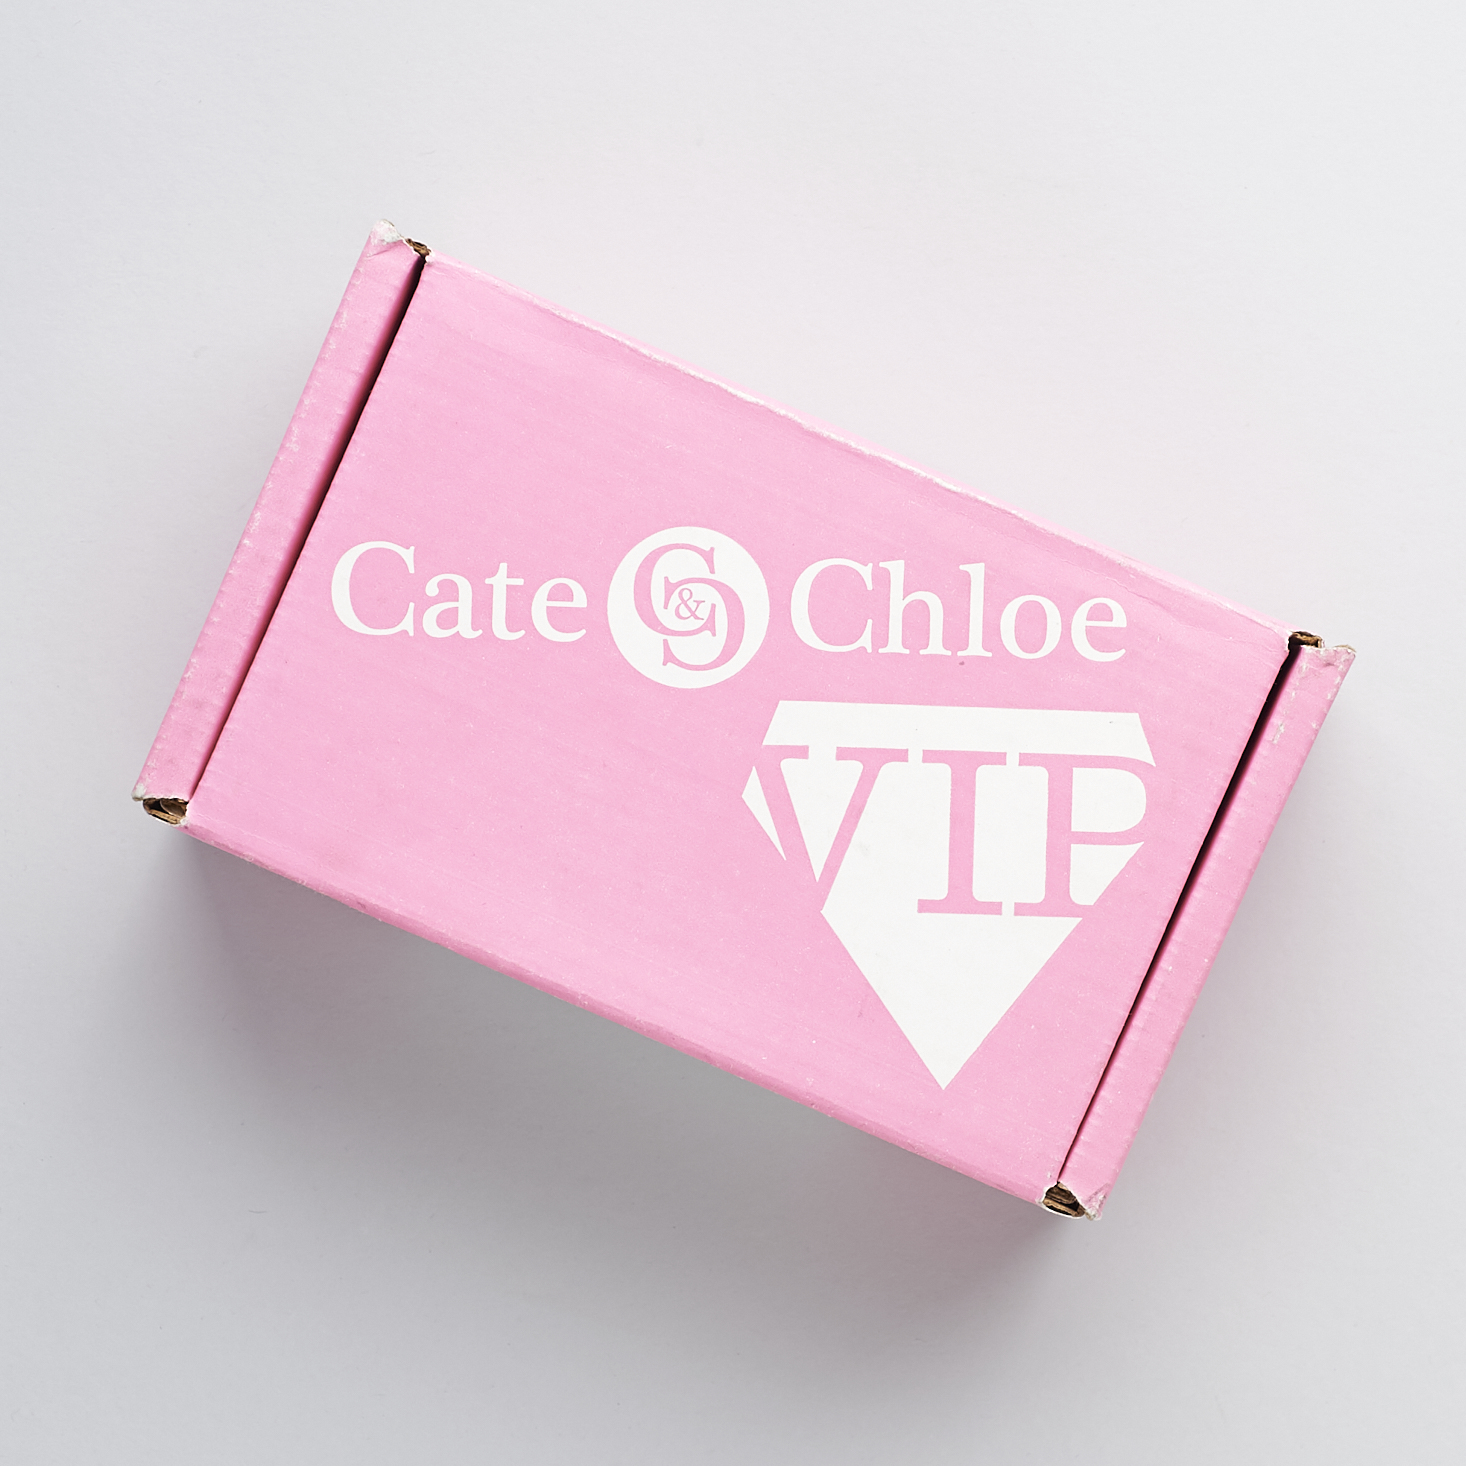 Cate & Chloe Subscription Box Review + Coupon – February 2017